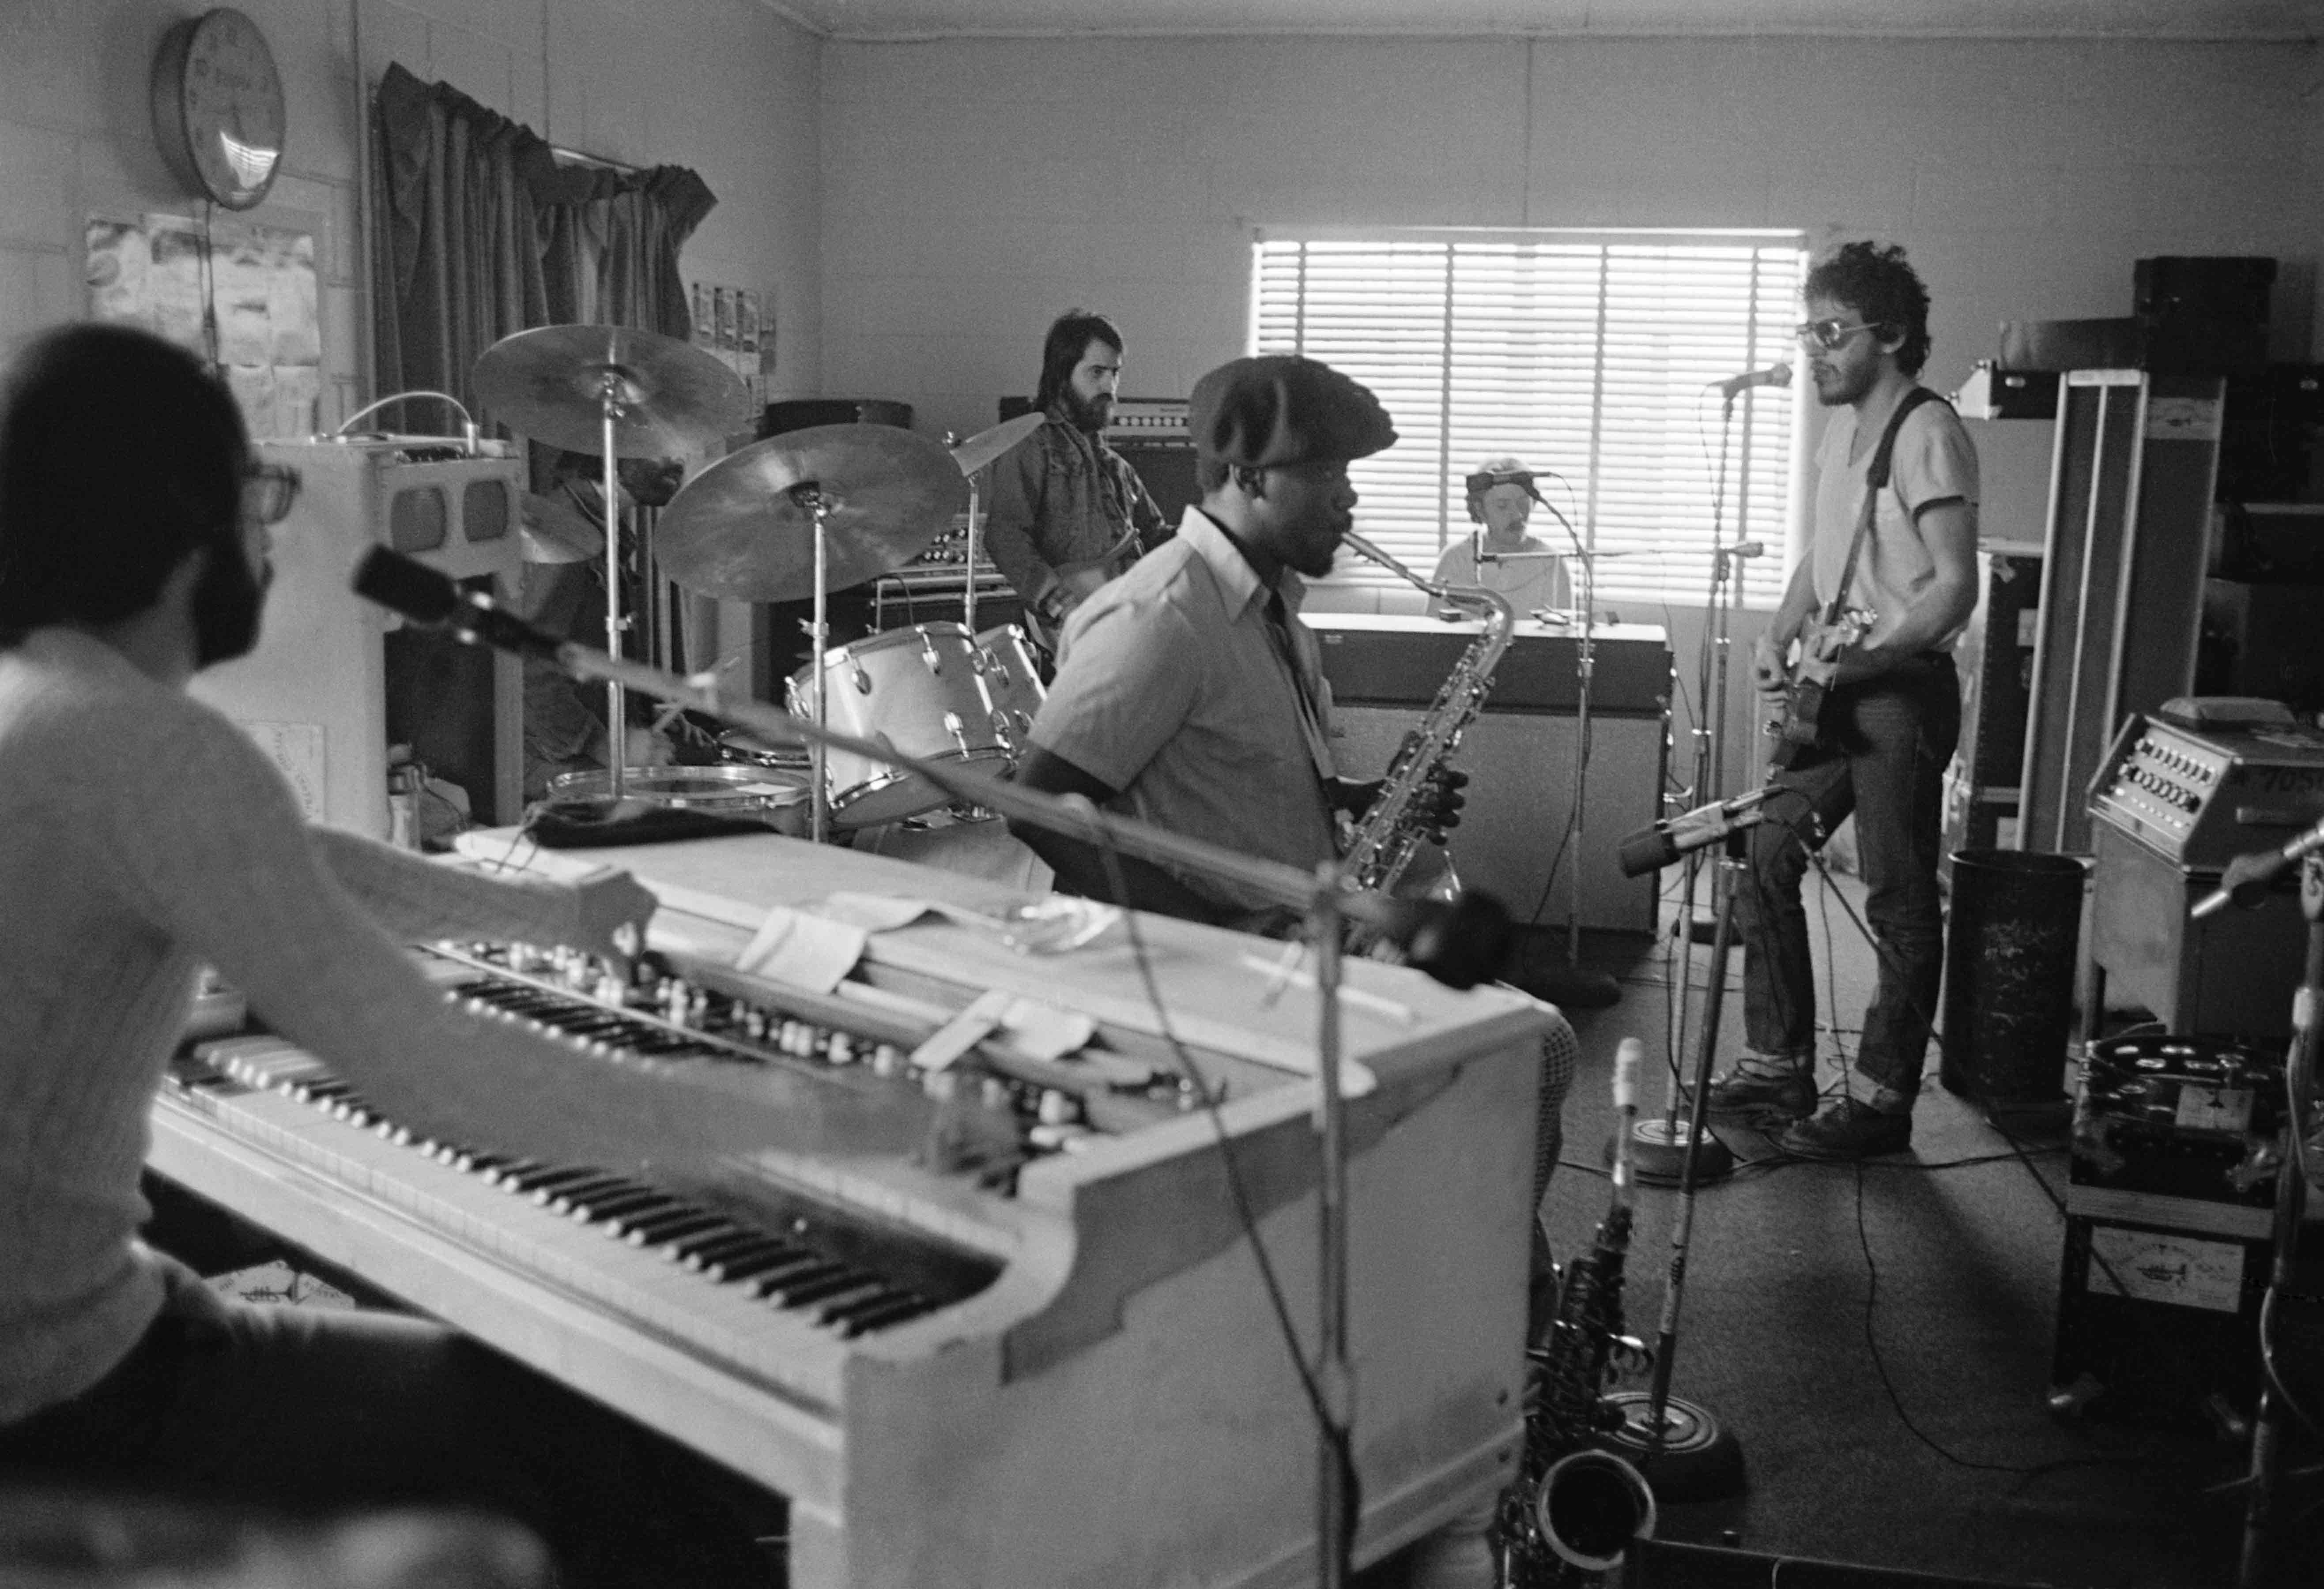 Springsteen rehearses with the E Street Band © Barbara Pyle/Reel Art Press